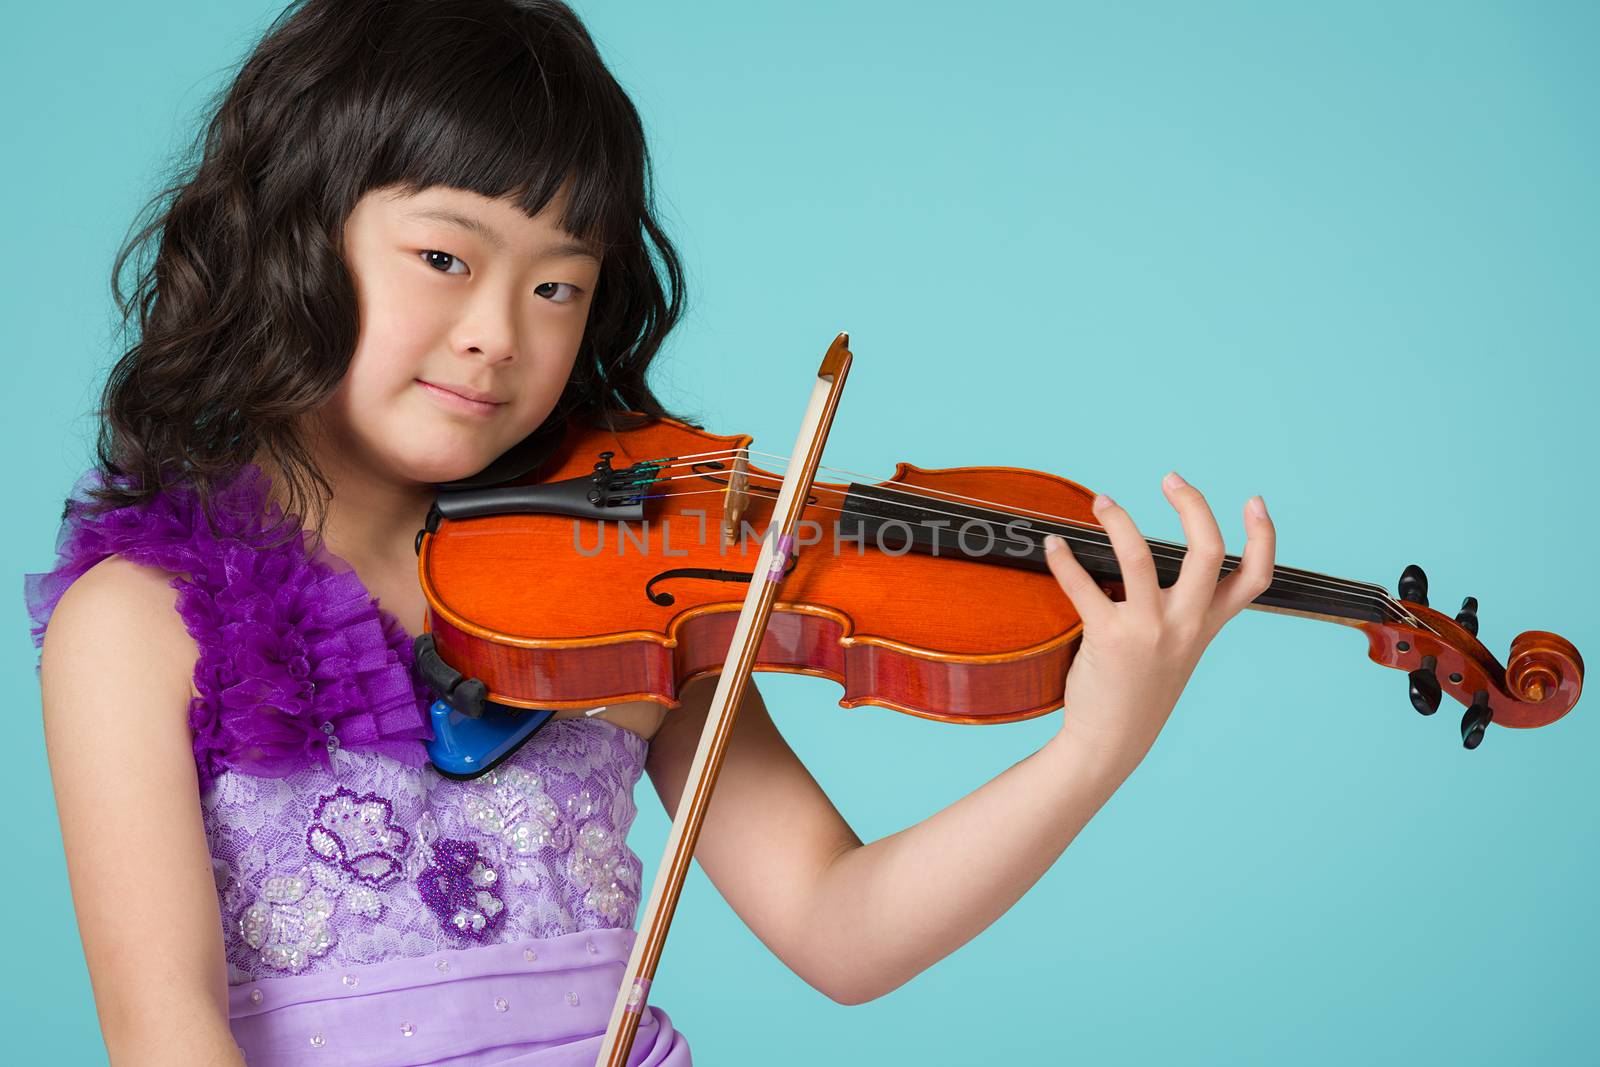 A portrait of a cute, happy and young Japanese girl in a purple dress on a blue background with a violin.